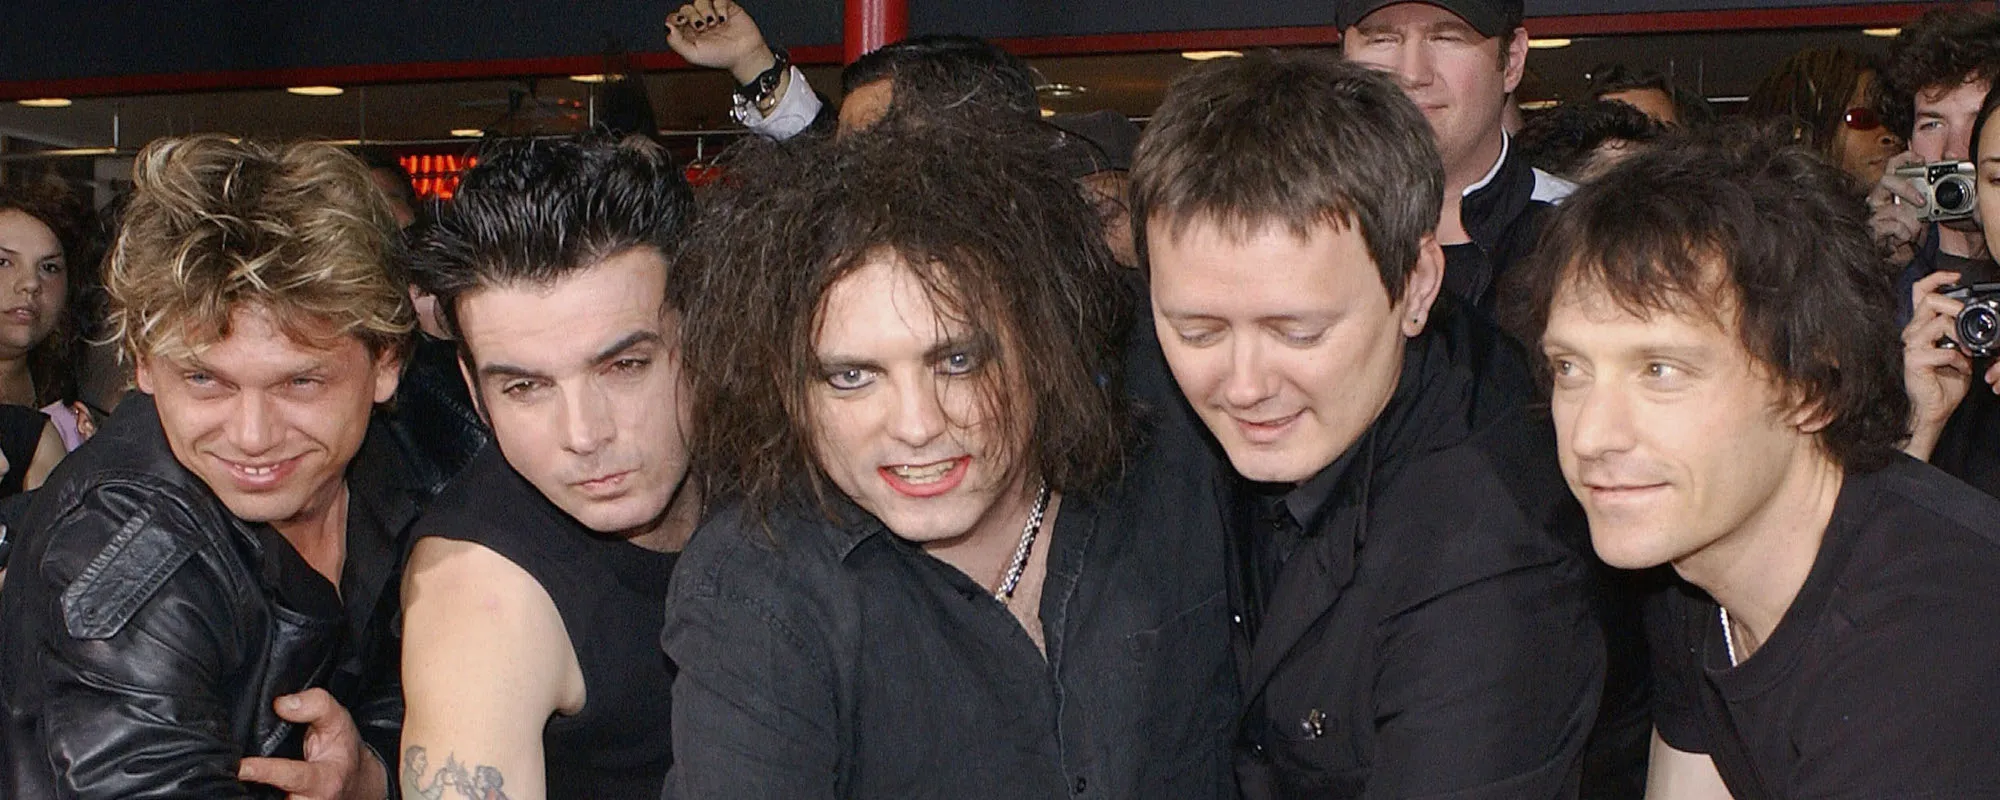 Behind the Band Name: The Cure - American Songwriter